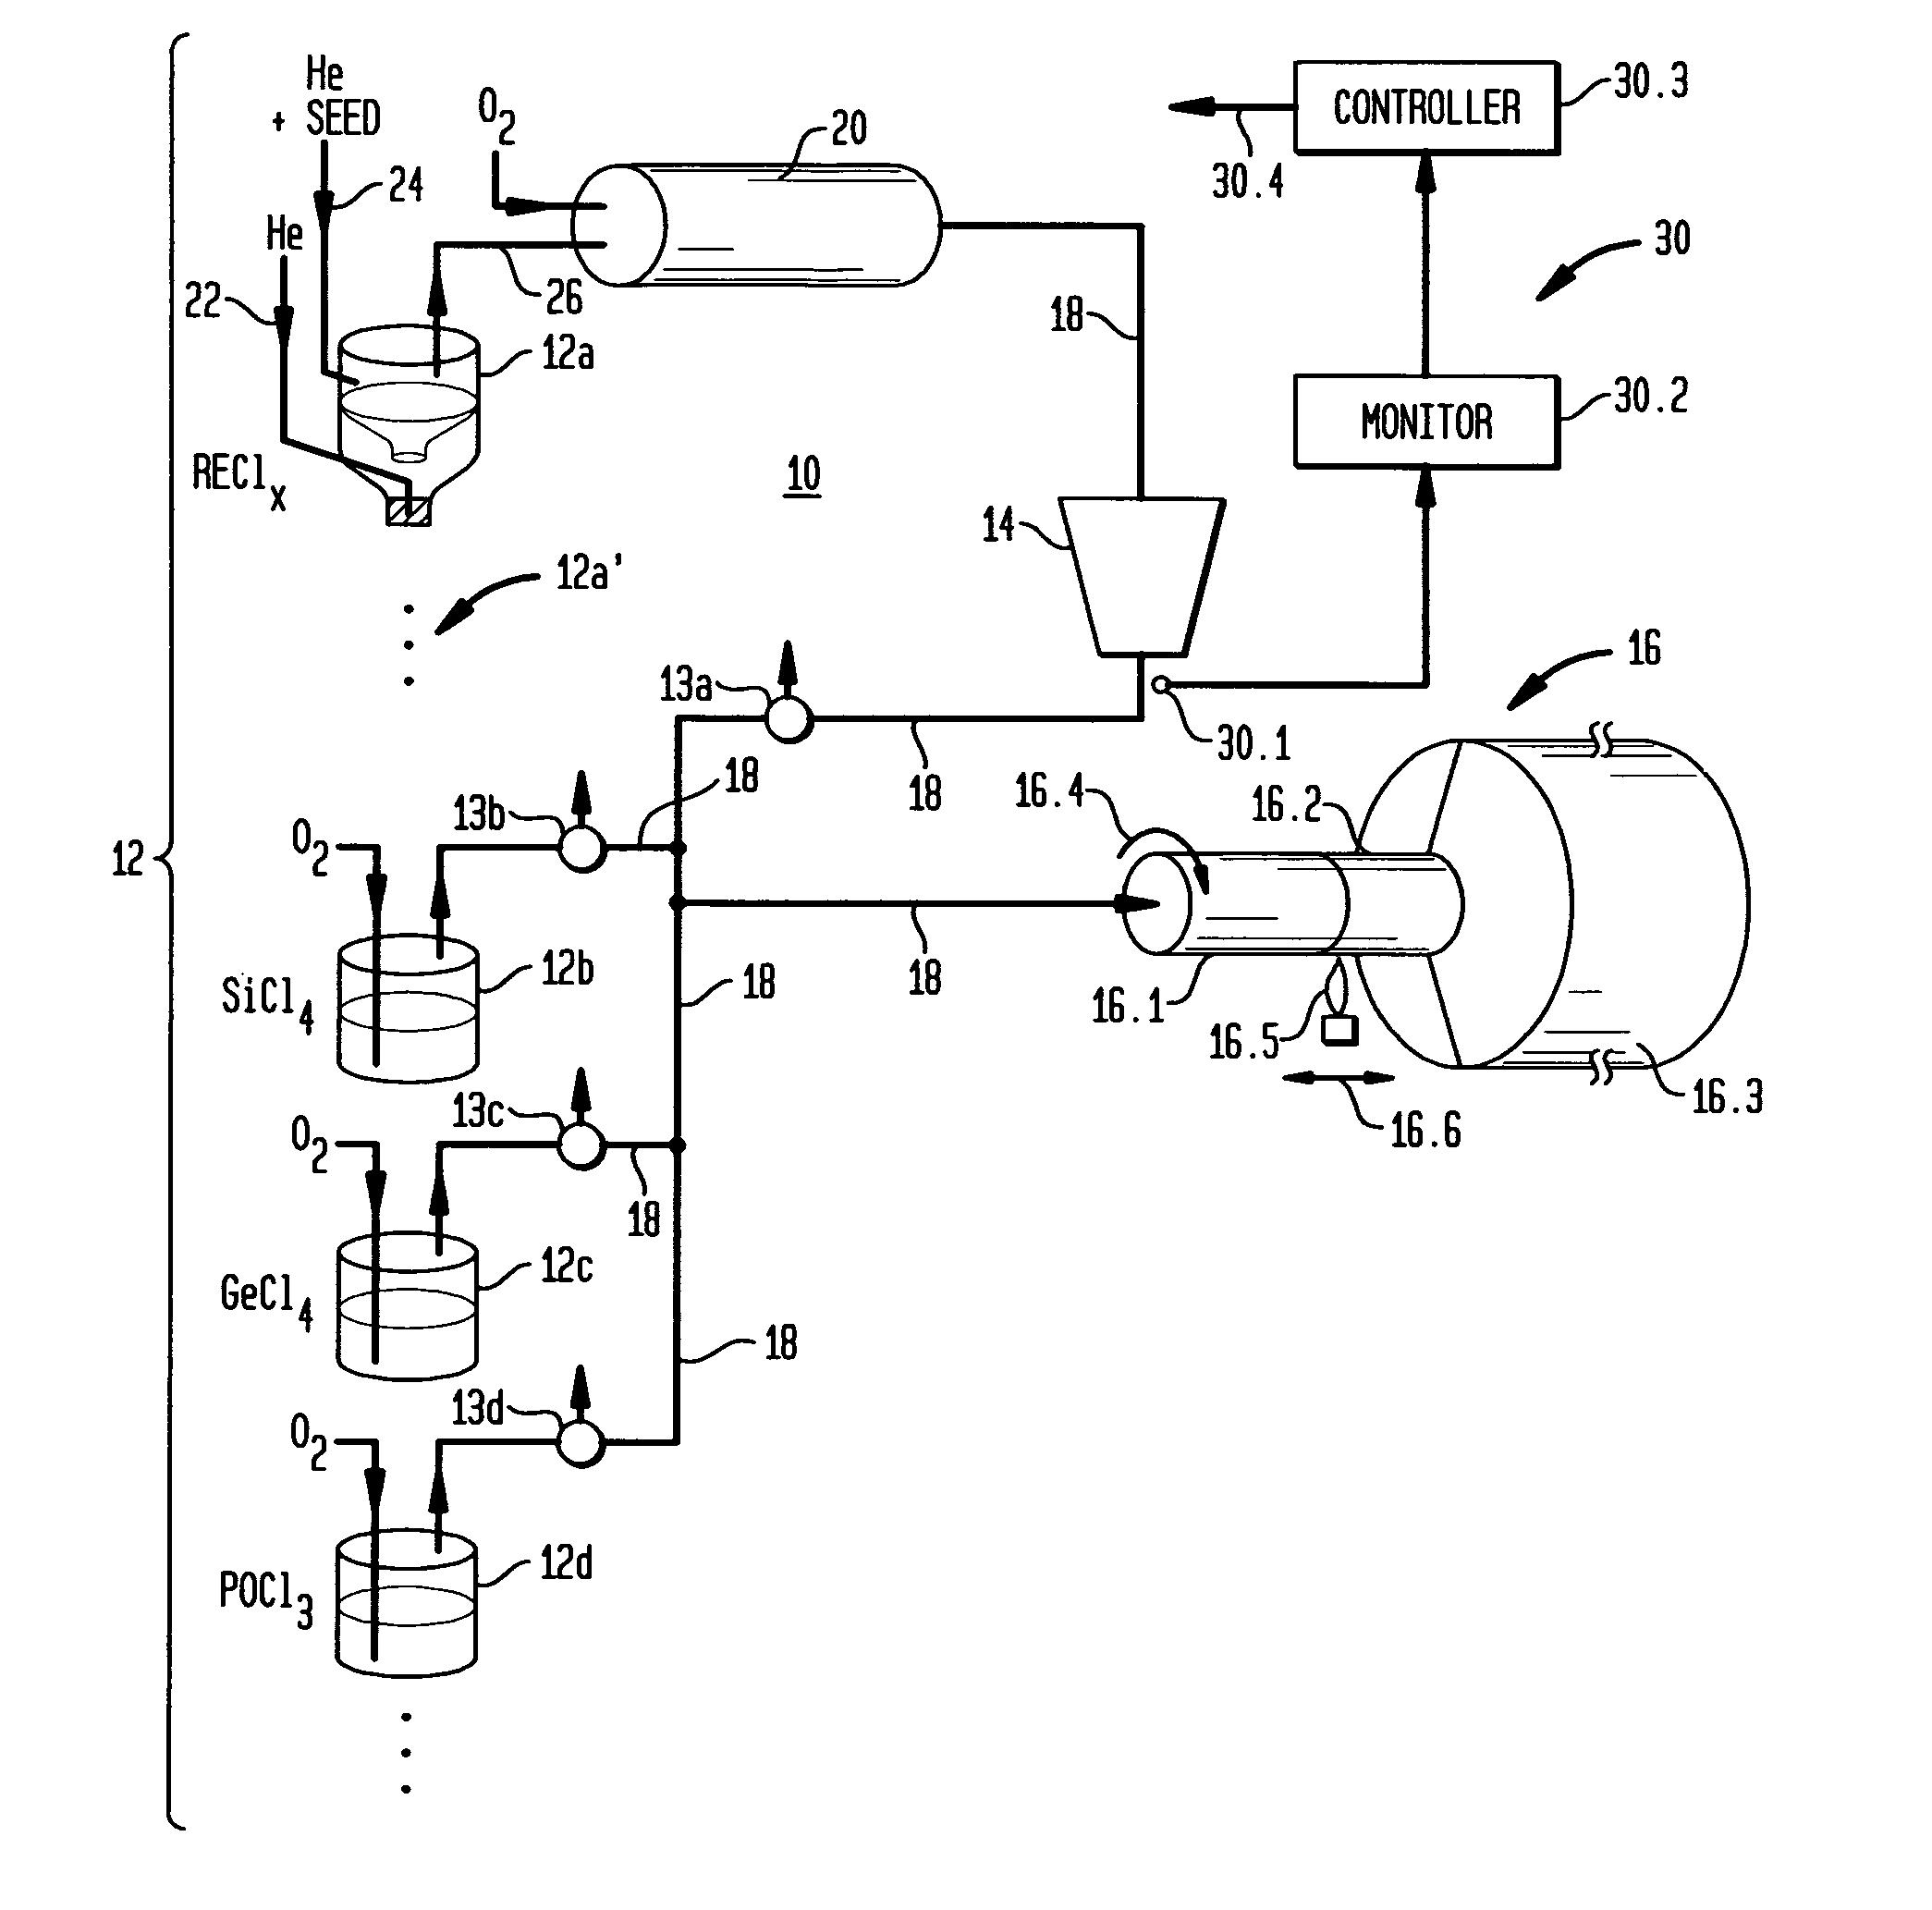 Apparatus and method for fabricating glass bodies using an aerosol delivery system